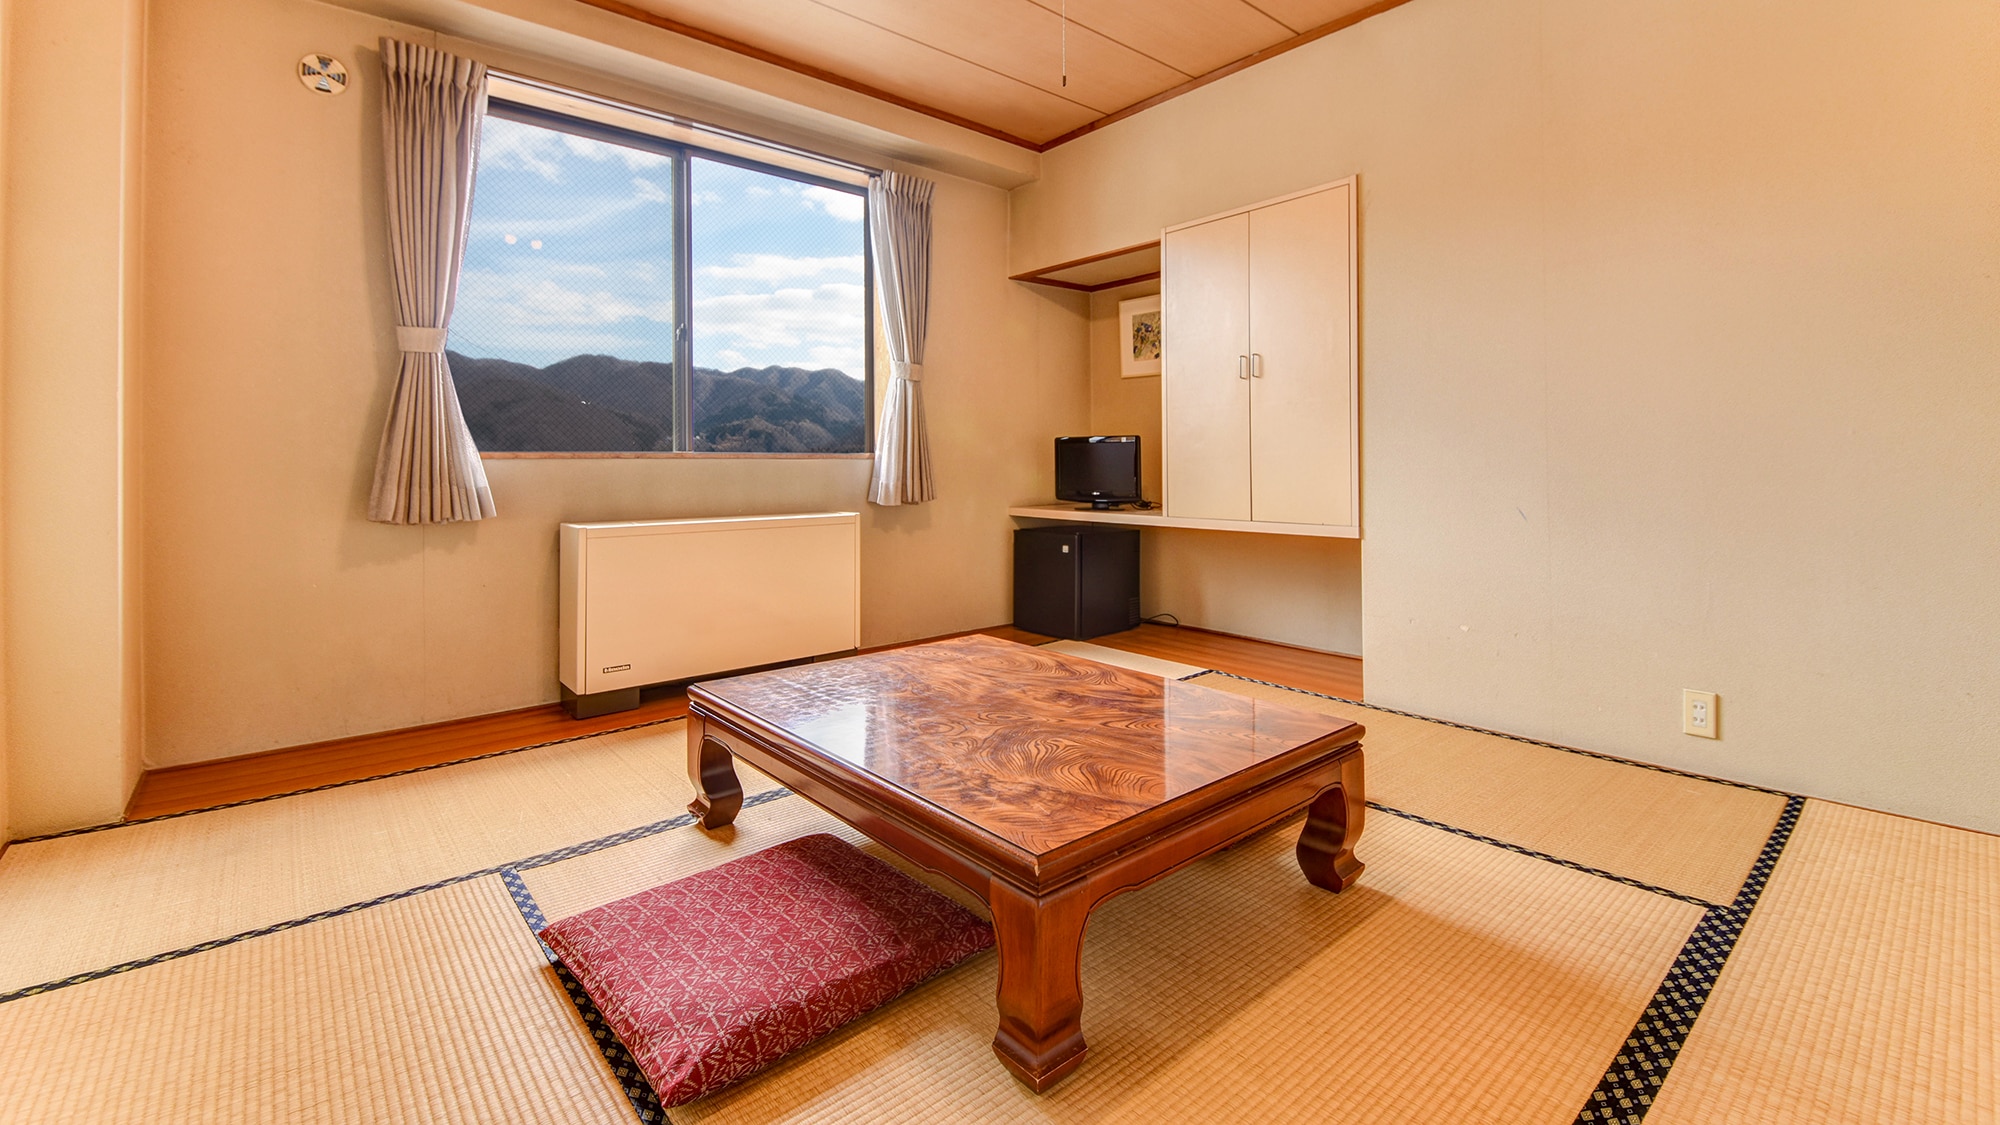 * Please relax in the Japanese-style room / tatami mats in the main building.